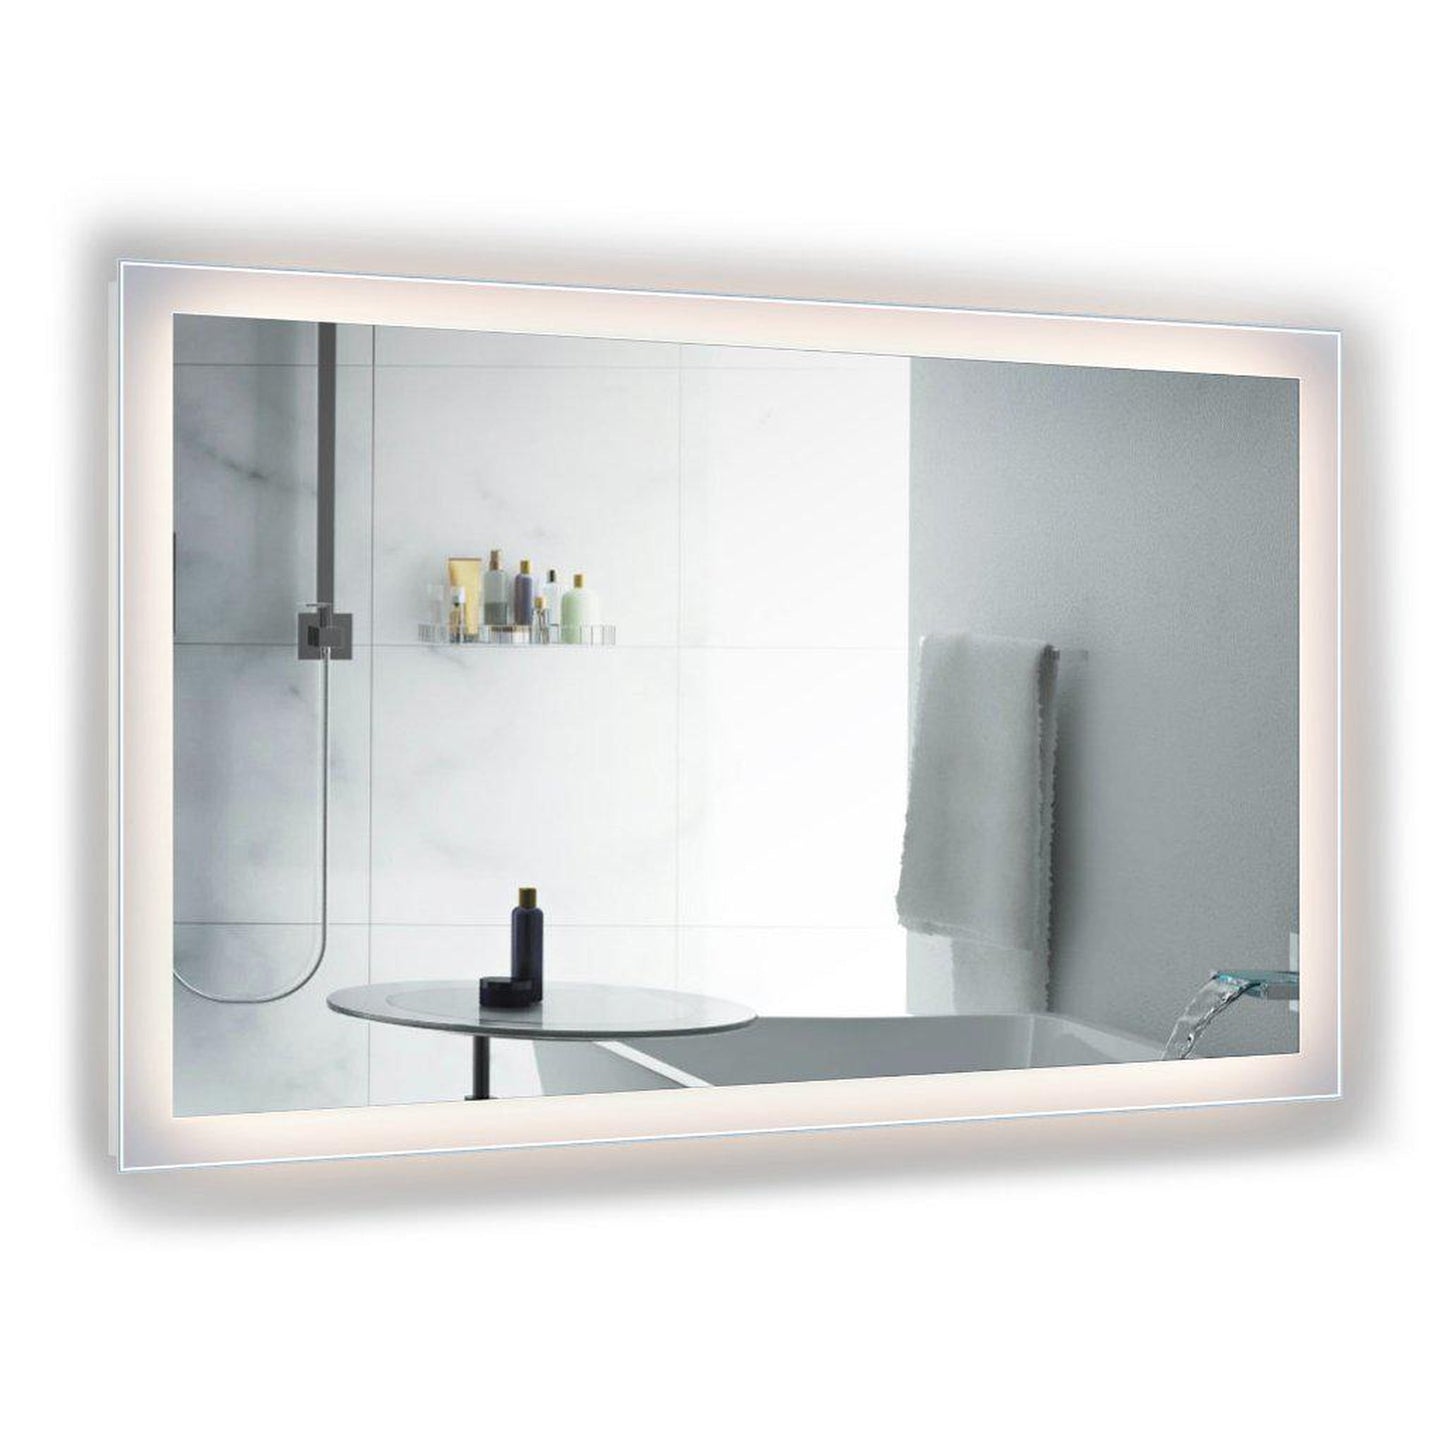 Krugg Reflections Stella 60" x 36" 5000K Rectangular Wall-Mounted Silver-Backed LED Bathroom Vanity Mirror With Built-in Defogger and Dimmer